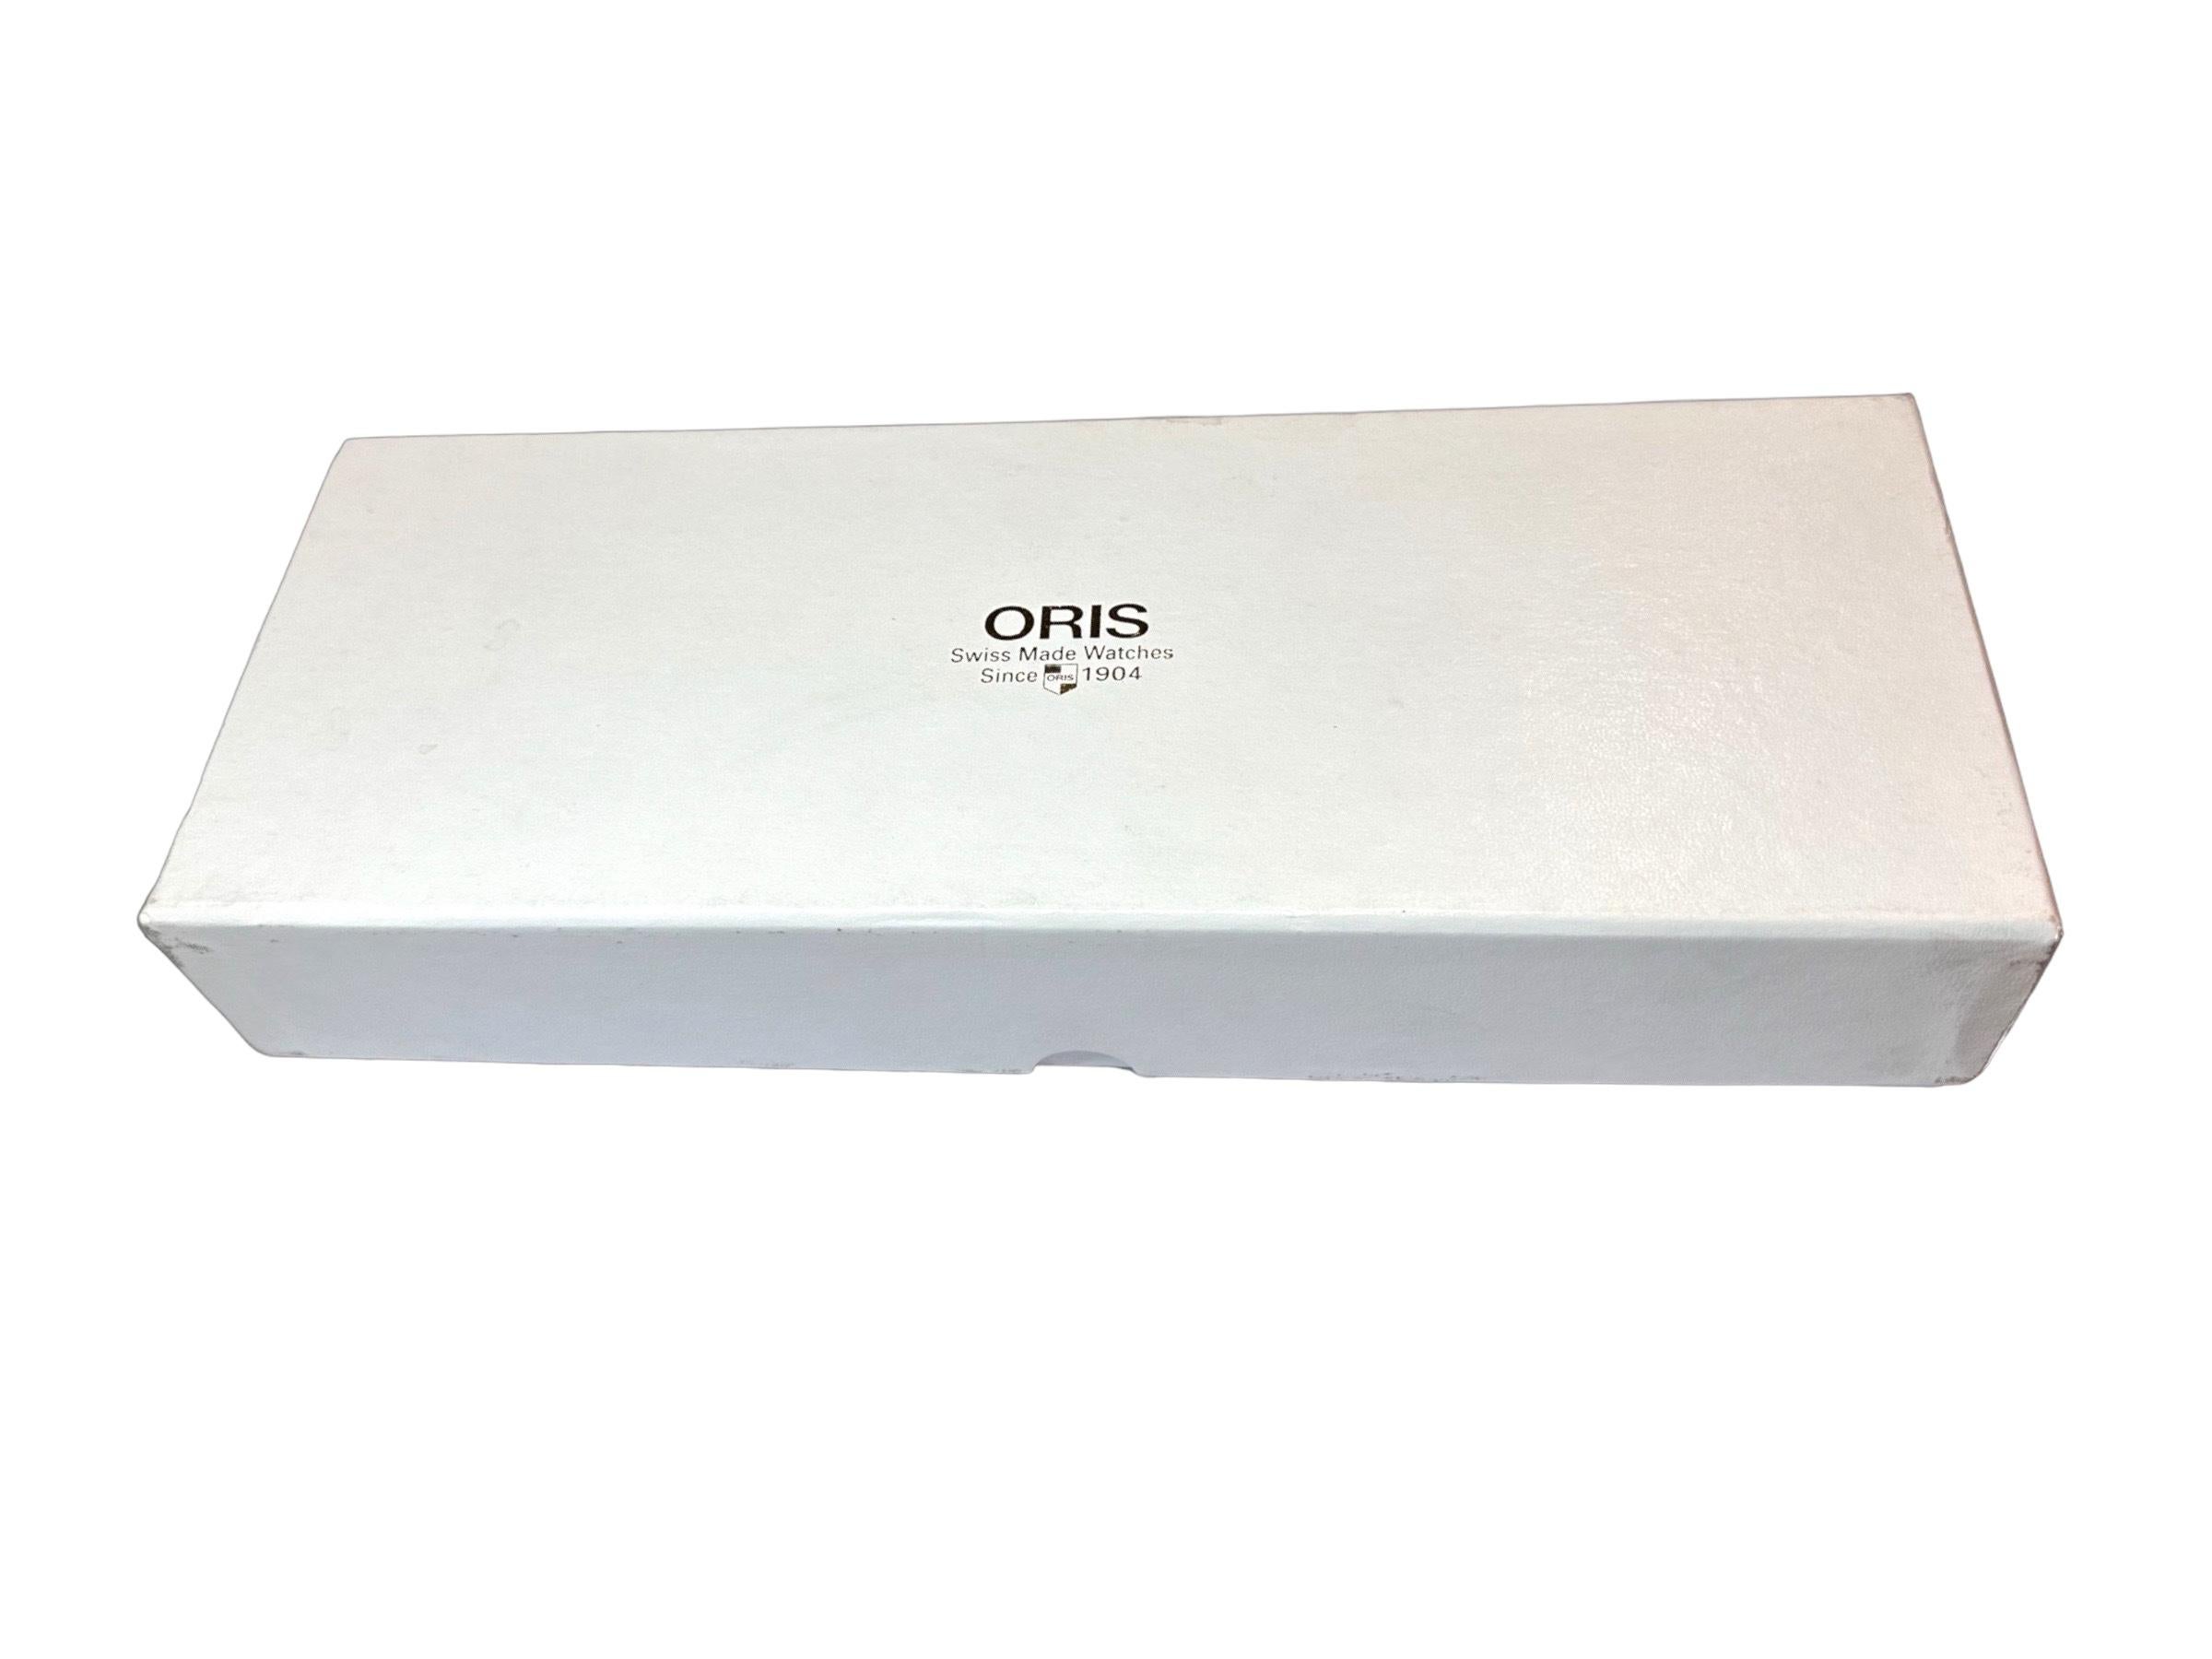 Oris Reveil Limited Edition Mechanical Alarm 18kt Gold, New with Box & Papers en vente 9